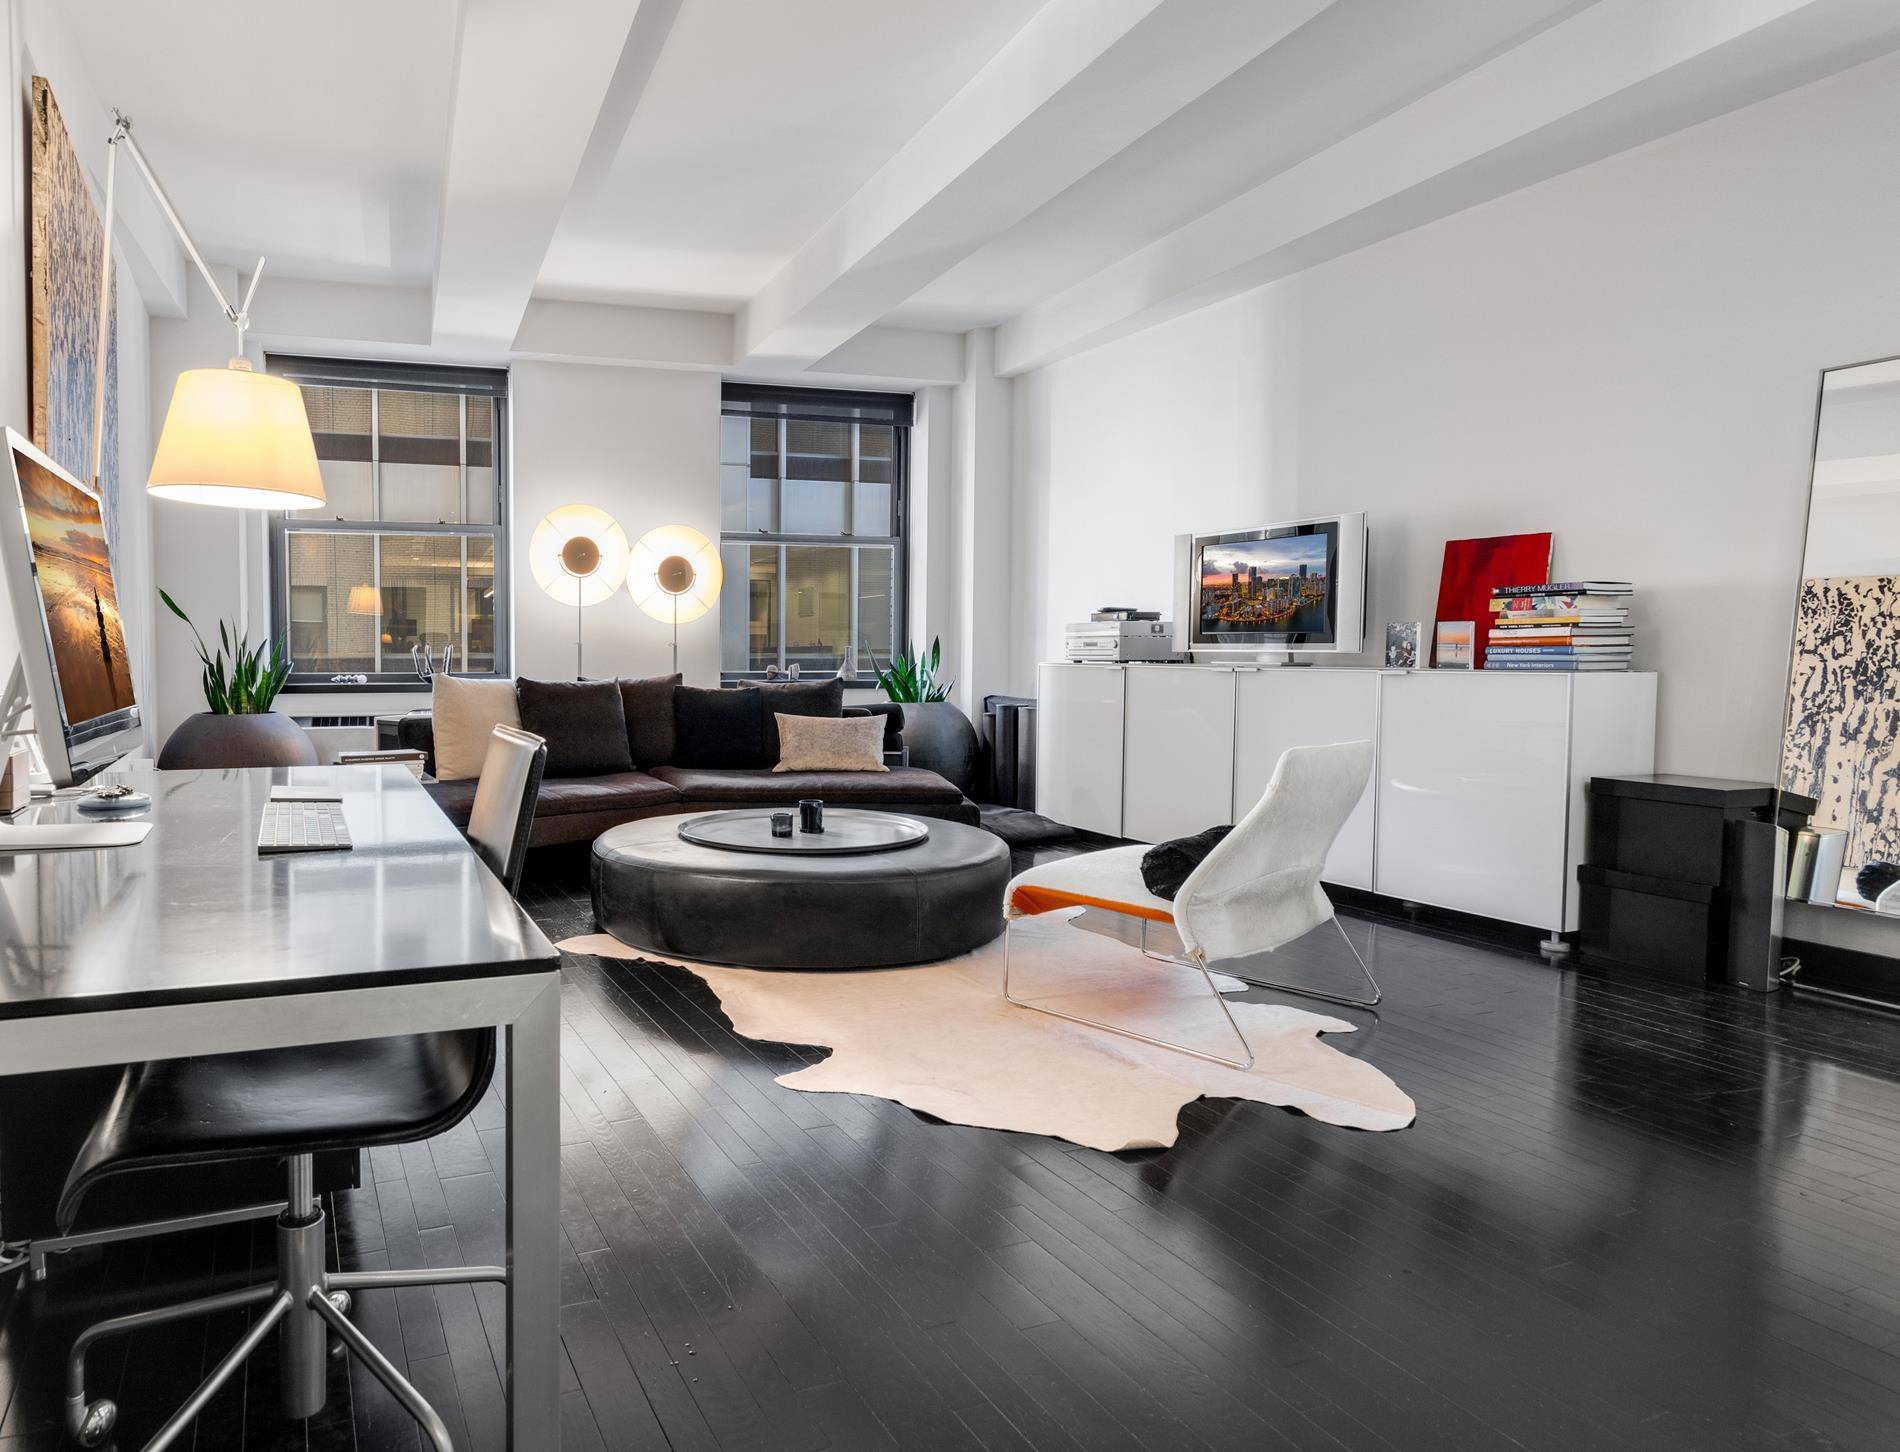 Step into apartment 516, a spacious loft spanning 1, 006 square feet at 20 Pine Street.